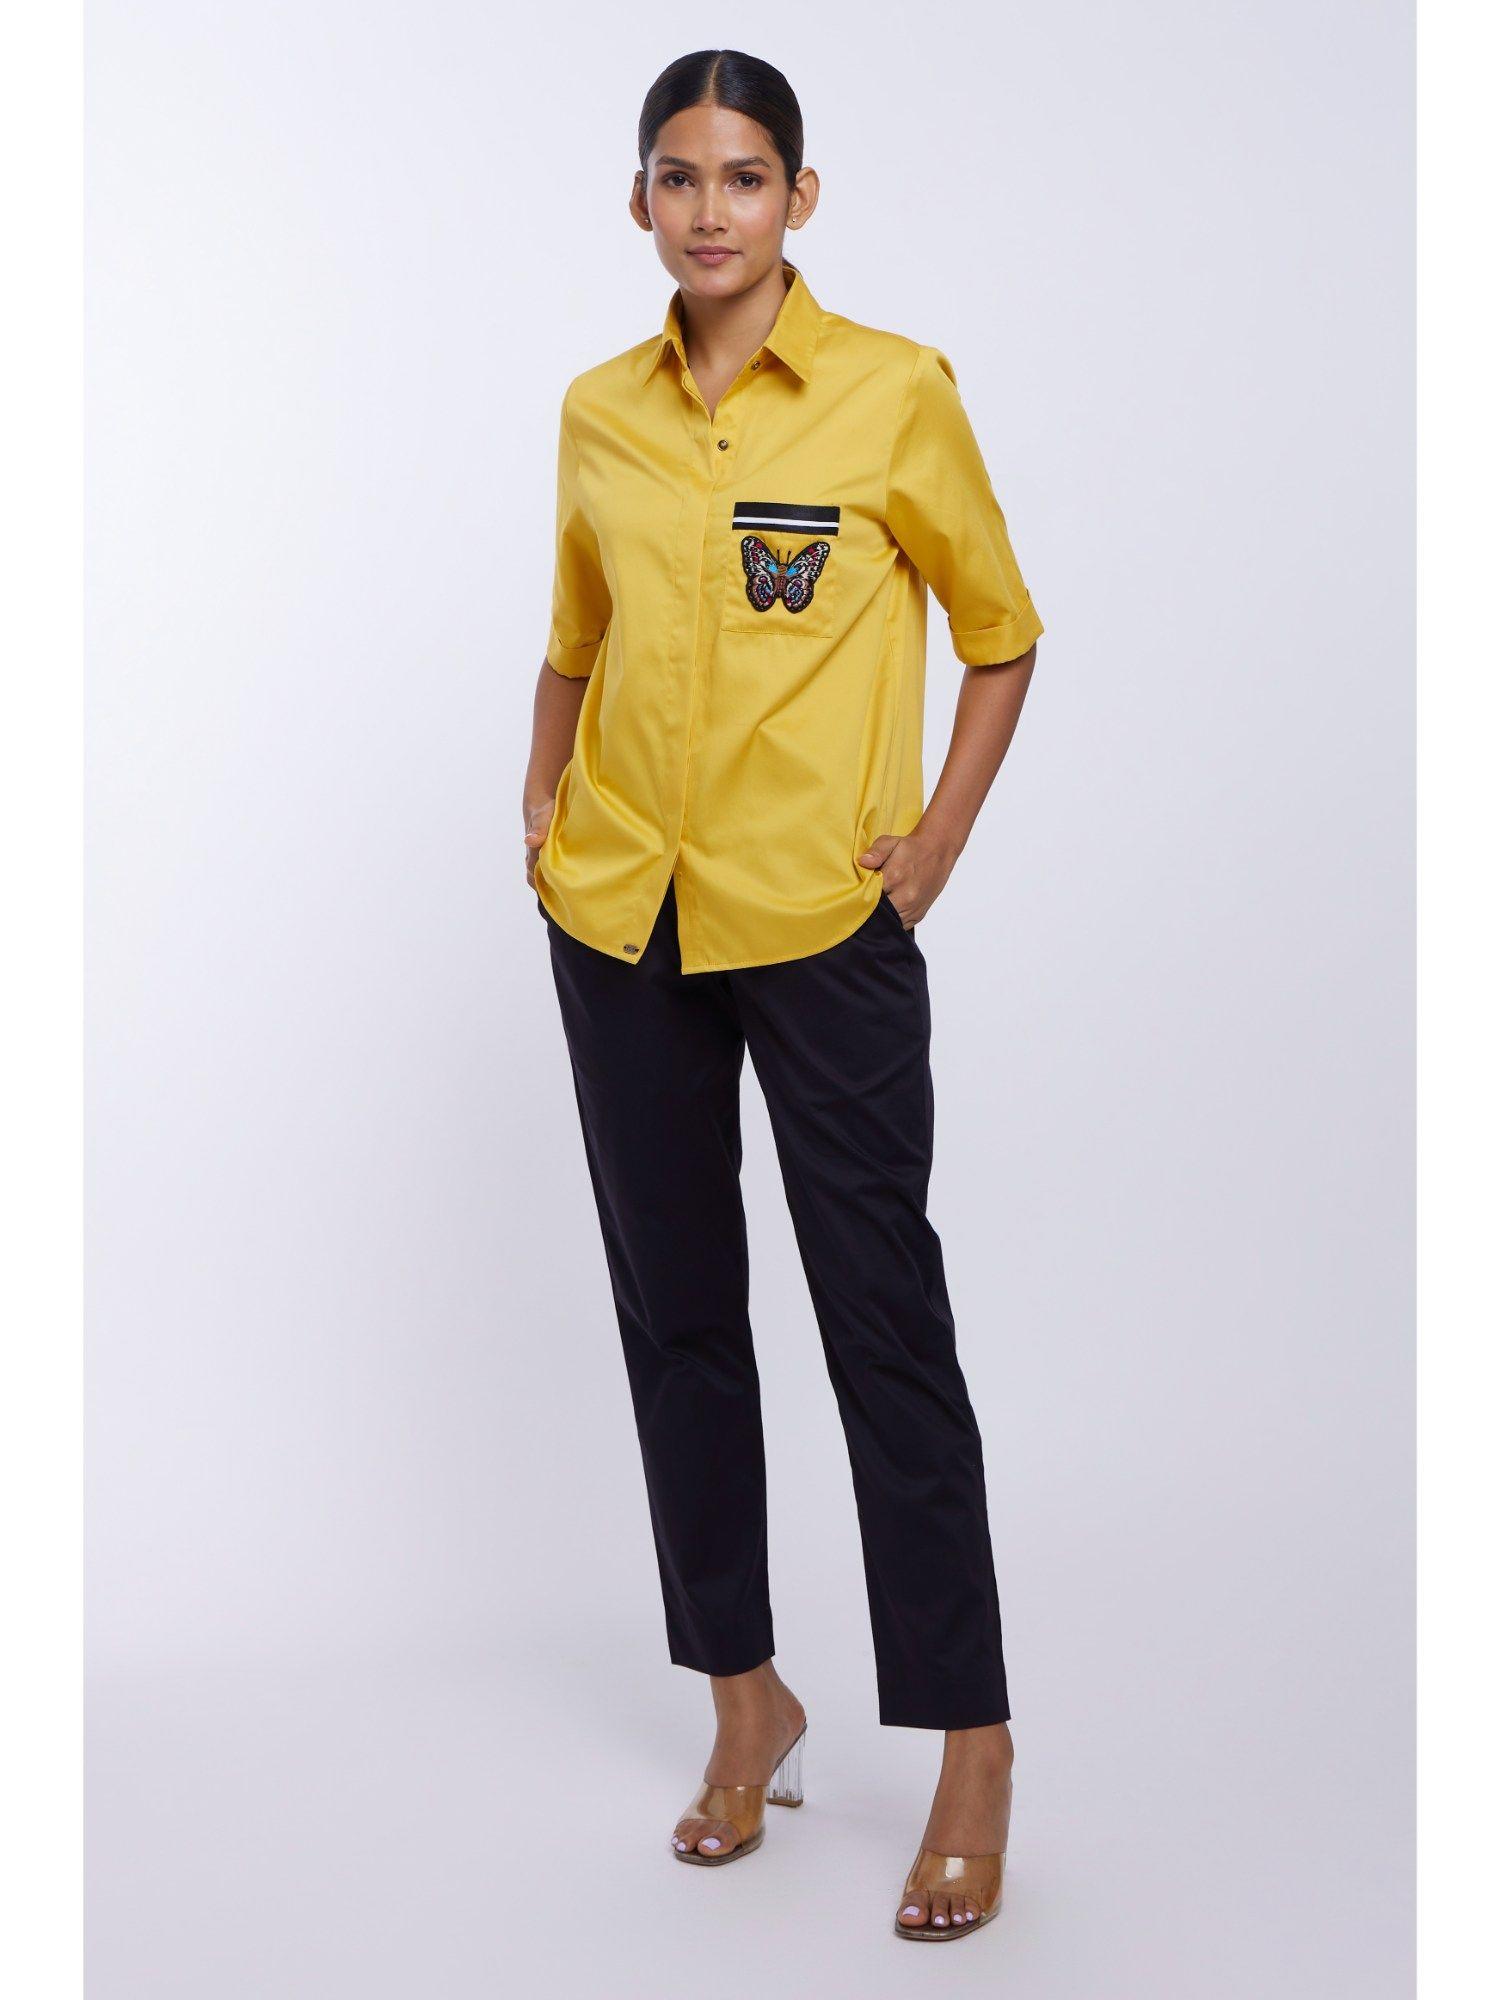 plv garden canary yellow embroidered butterfly shirt